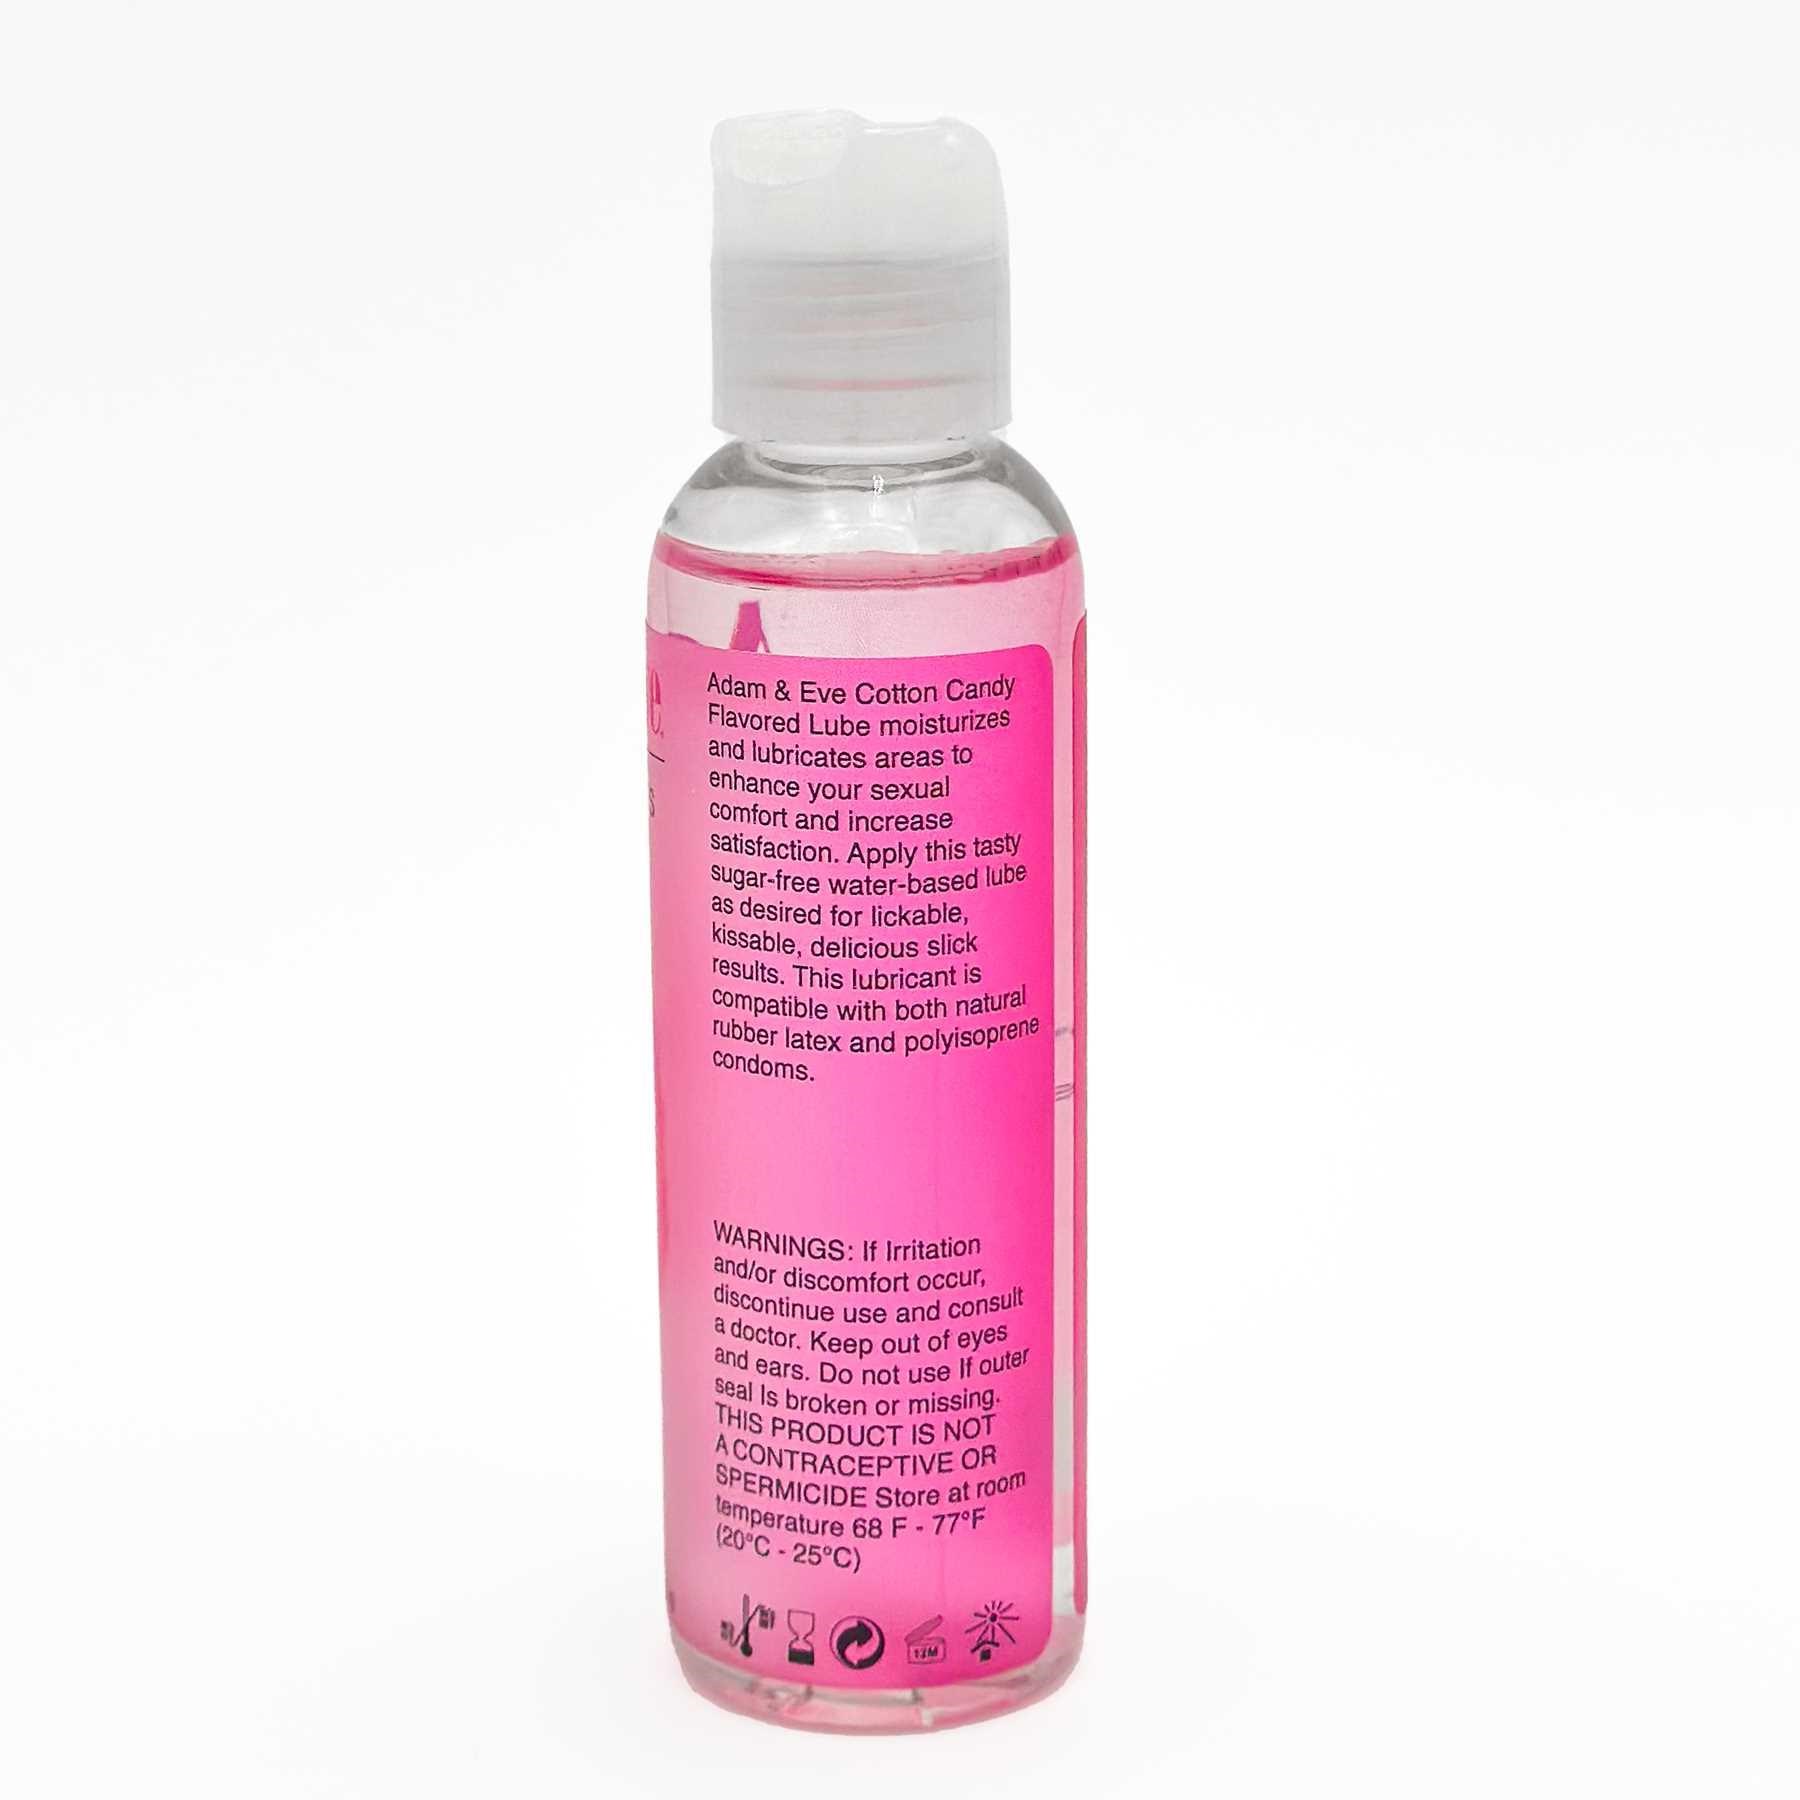 Lube Life Water Based Lubricant Cotton Candy Flavor 8 Oz